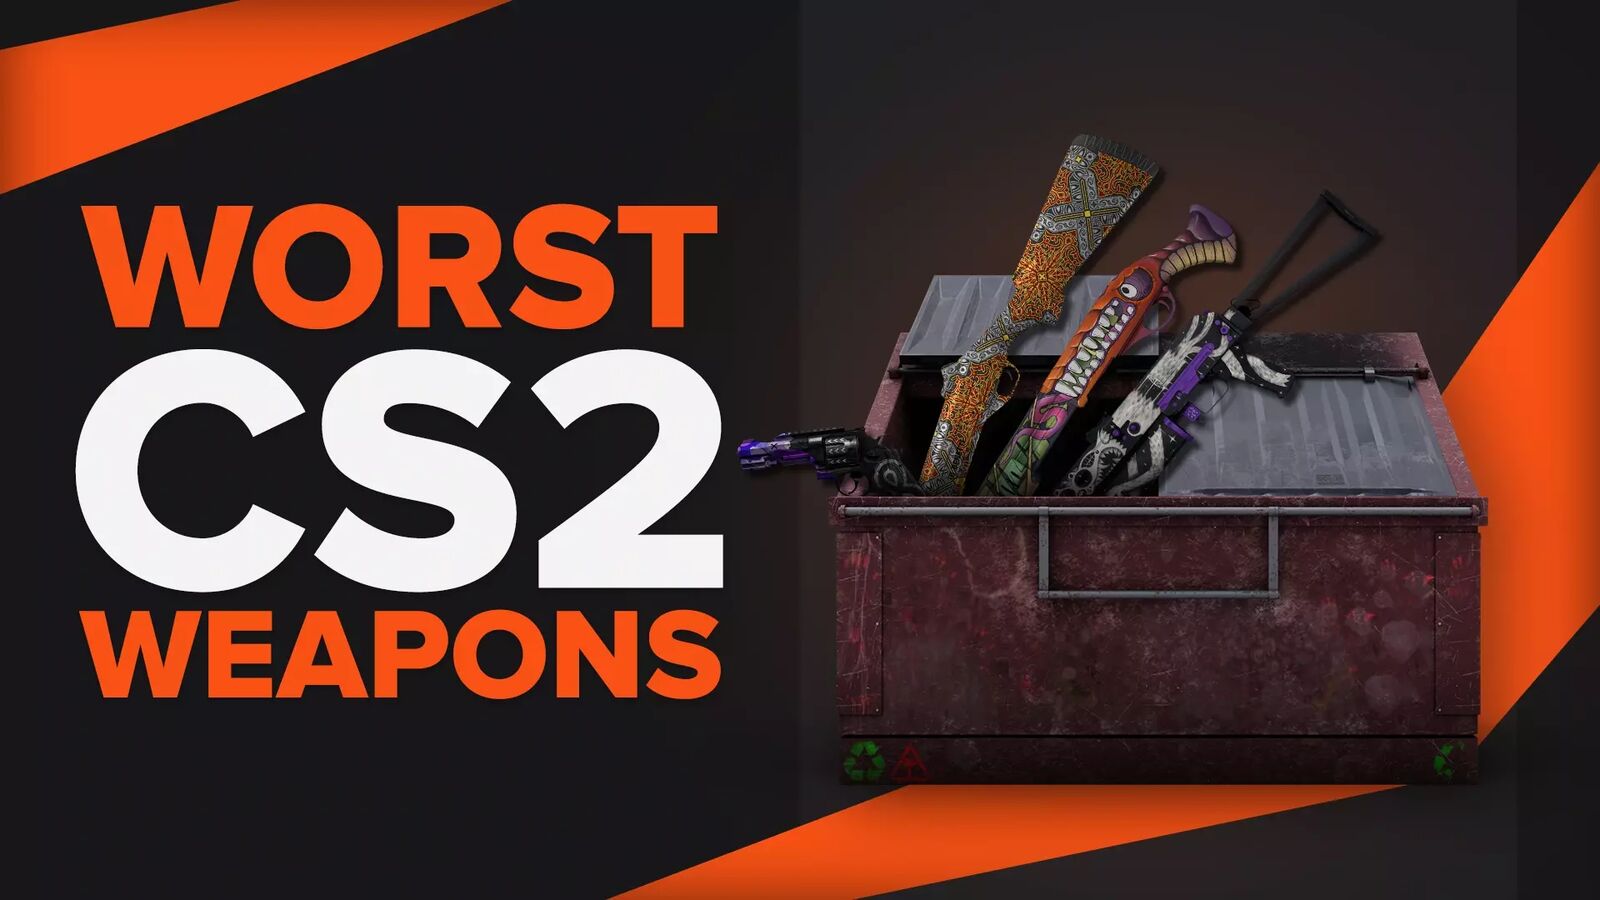 7 Worst Weapons CS2 Has To Offer [Ranked]